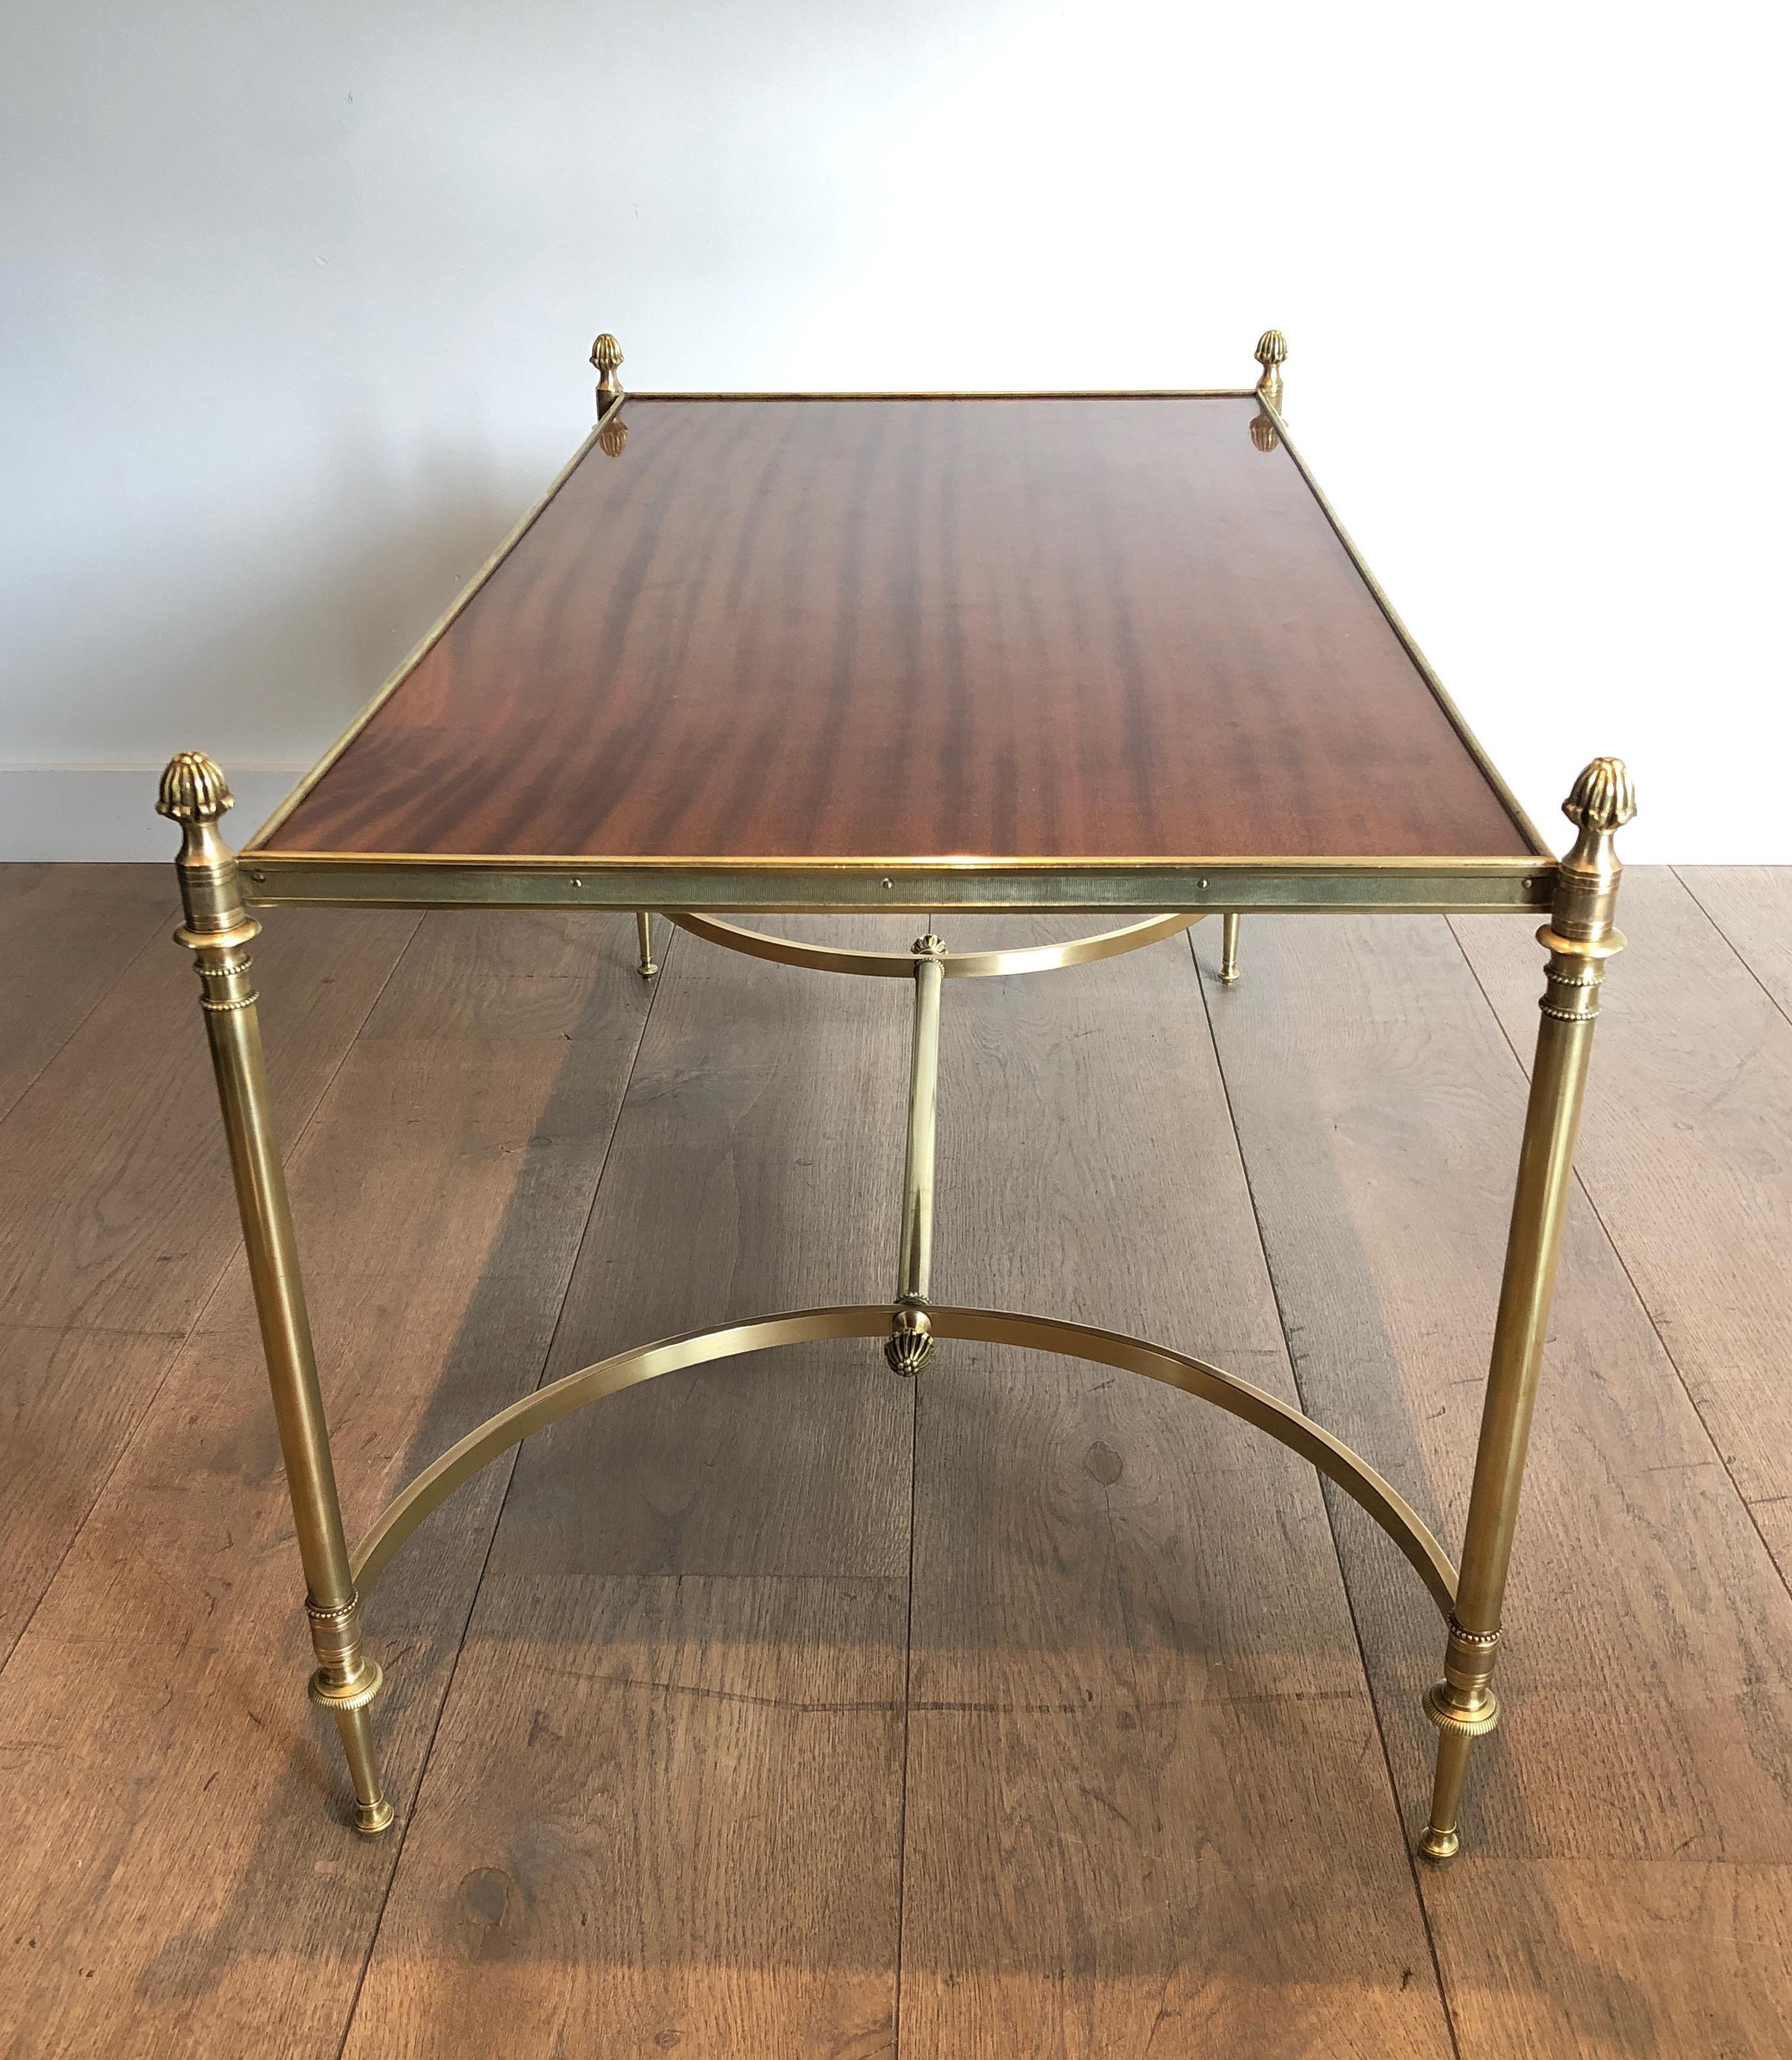 Mid-20th Century Brass and Mahogany Coffee Table by Maison Jansen, circa 1940